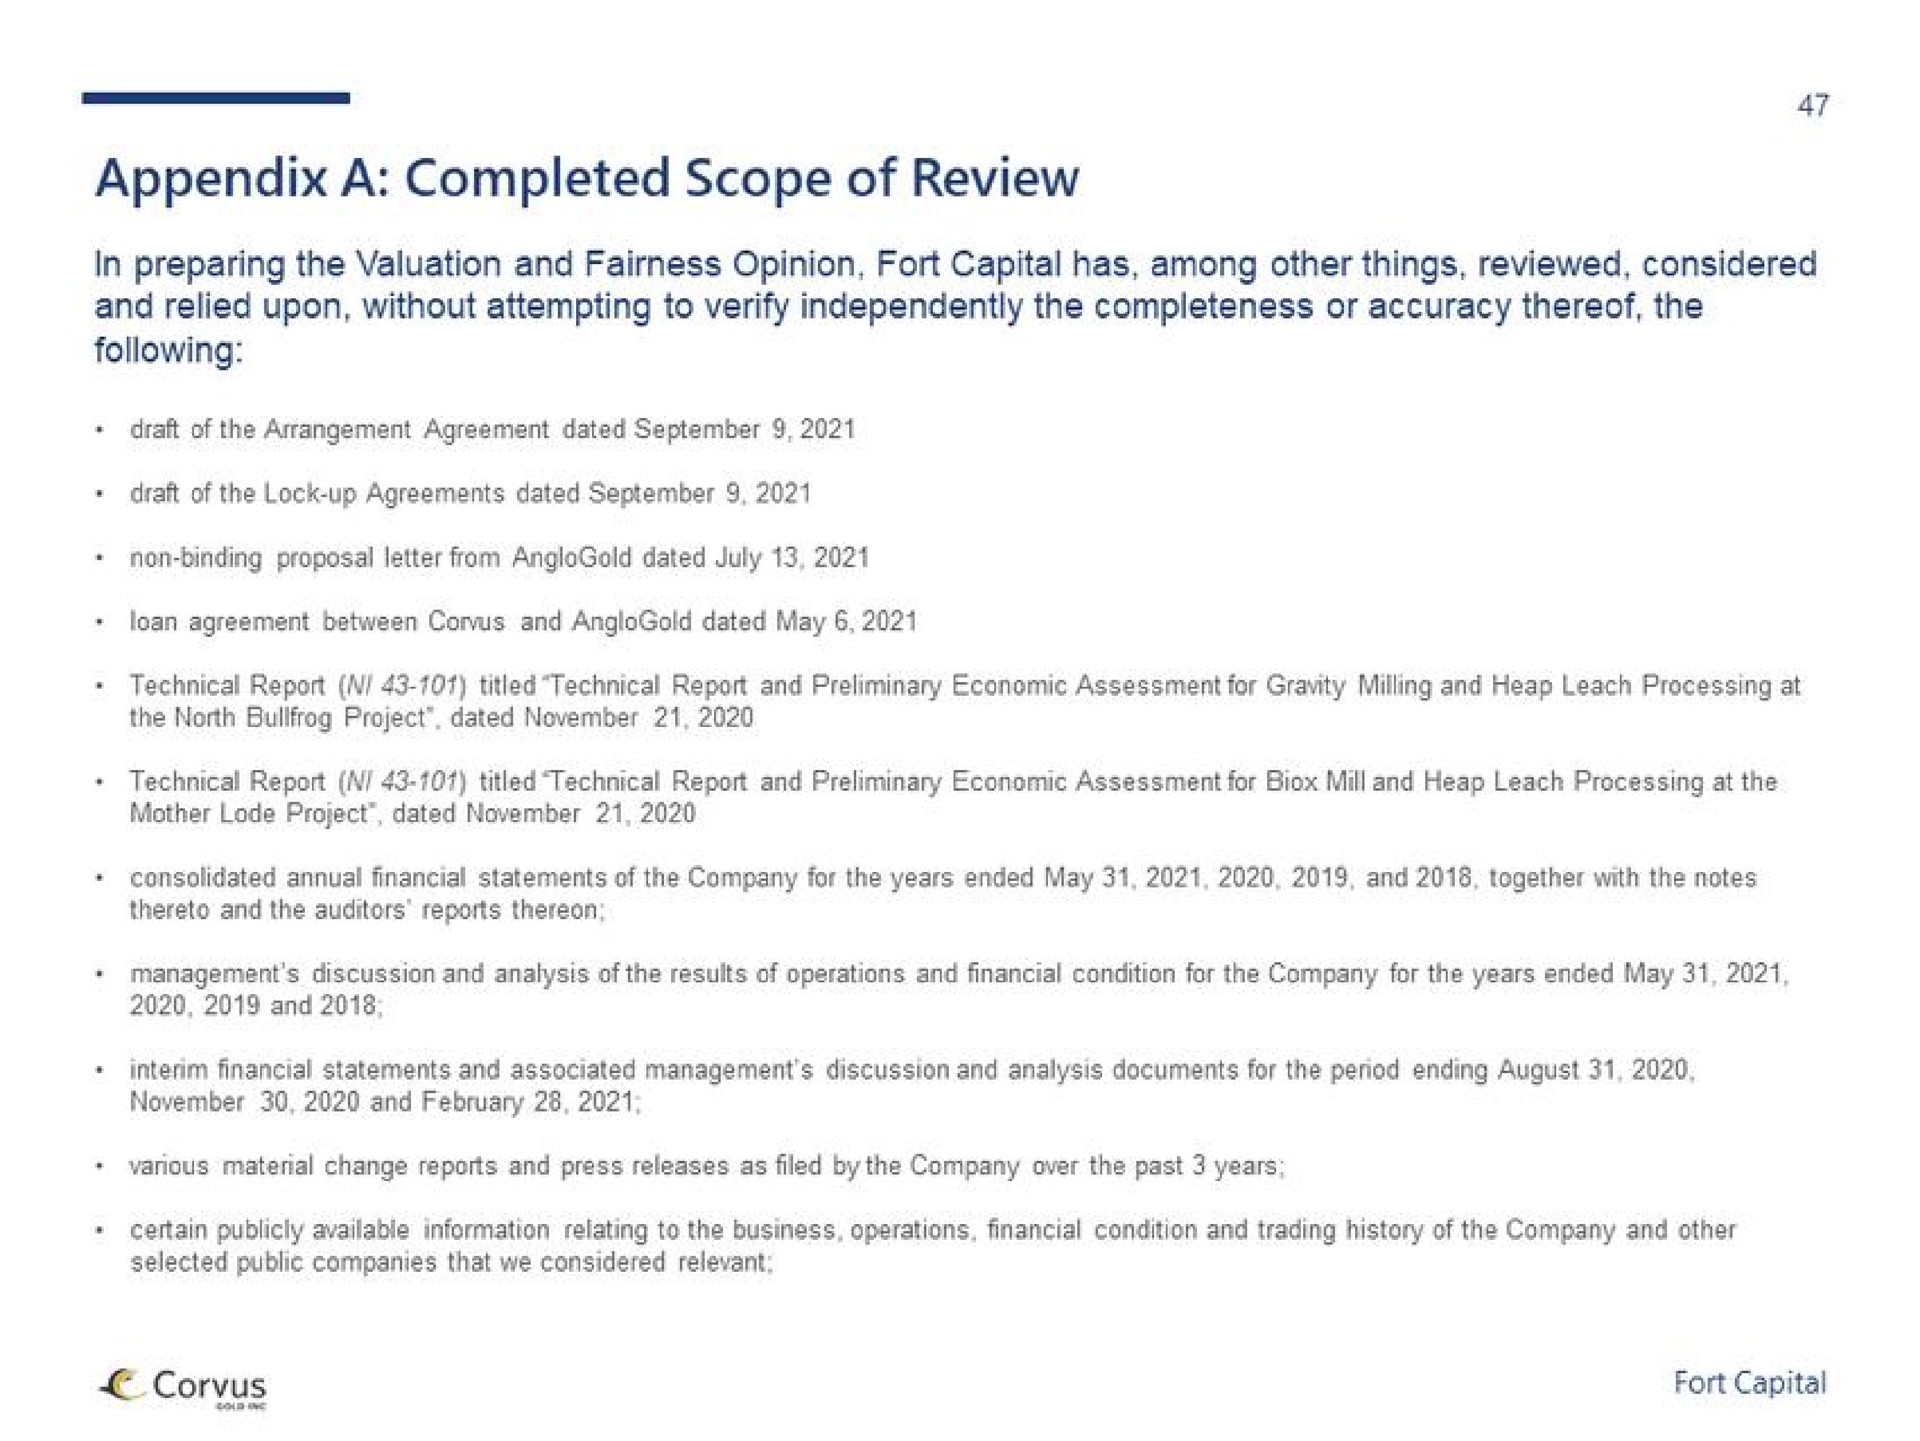 appendix a completed scope of review | Fort Capital